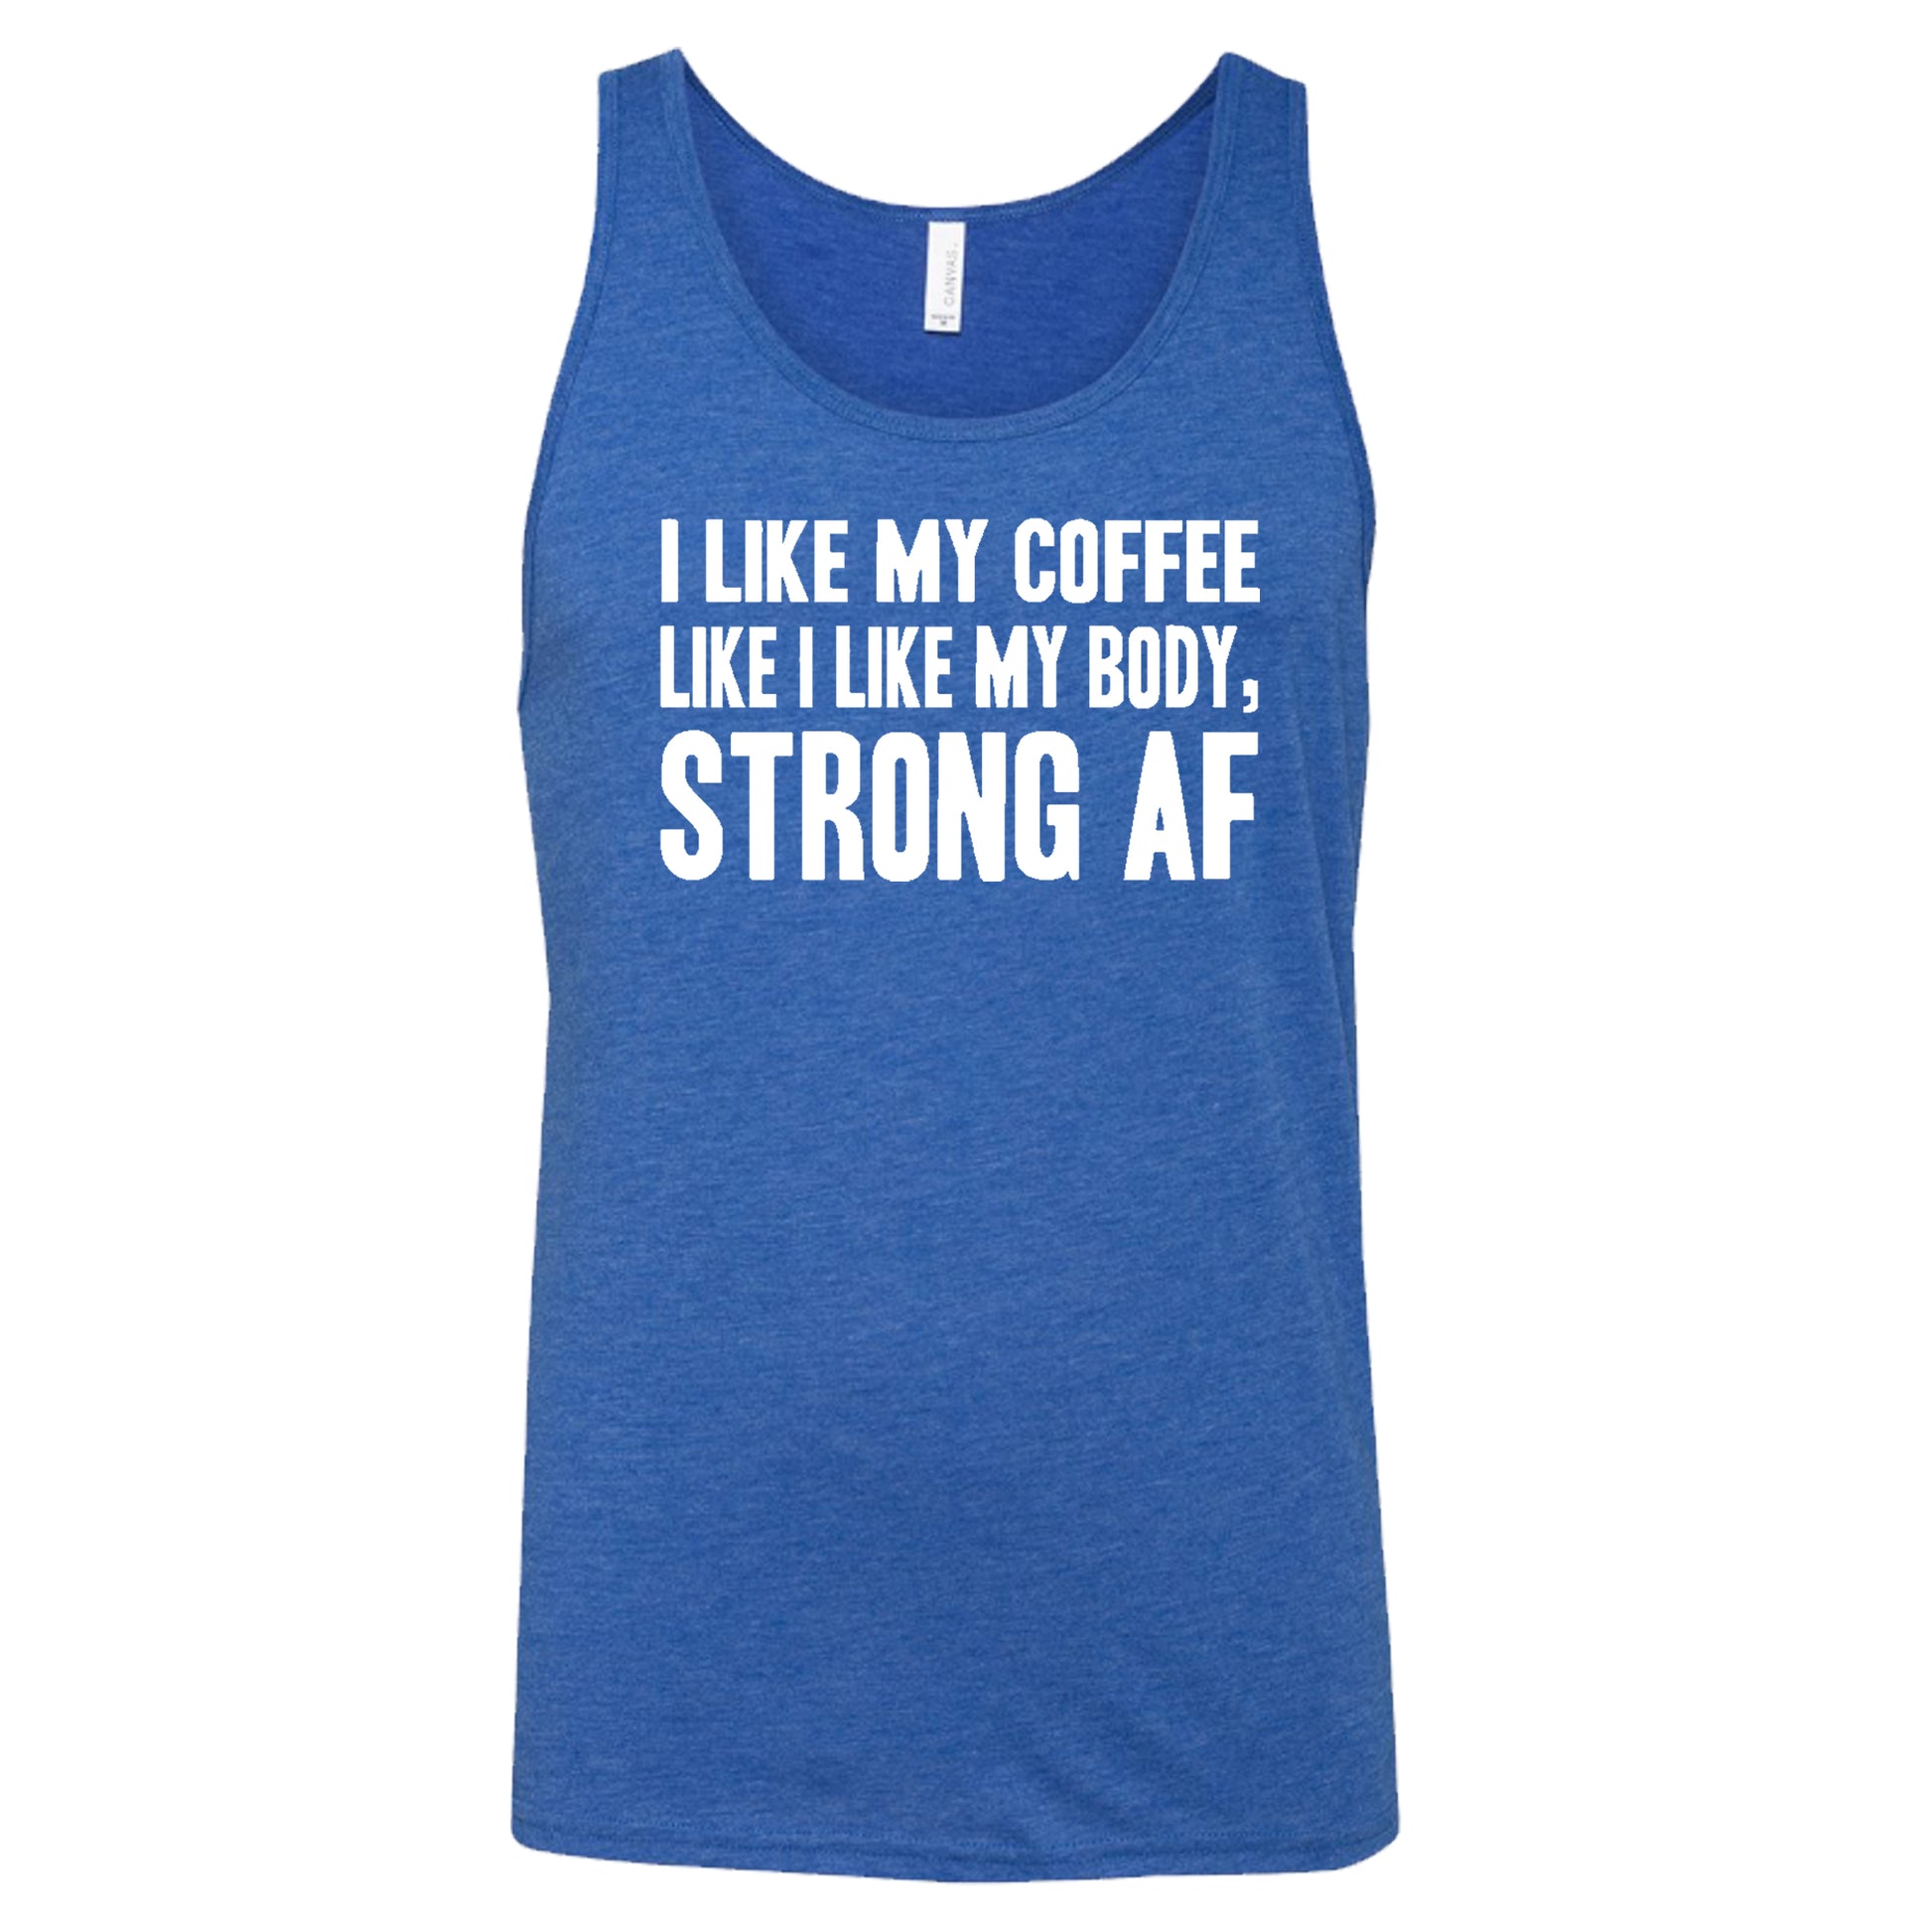 "I Like My Coffee Like I Like My Body Strong AF" quote in white lettering on blue tank